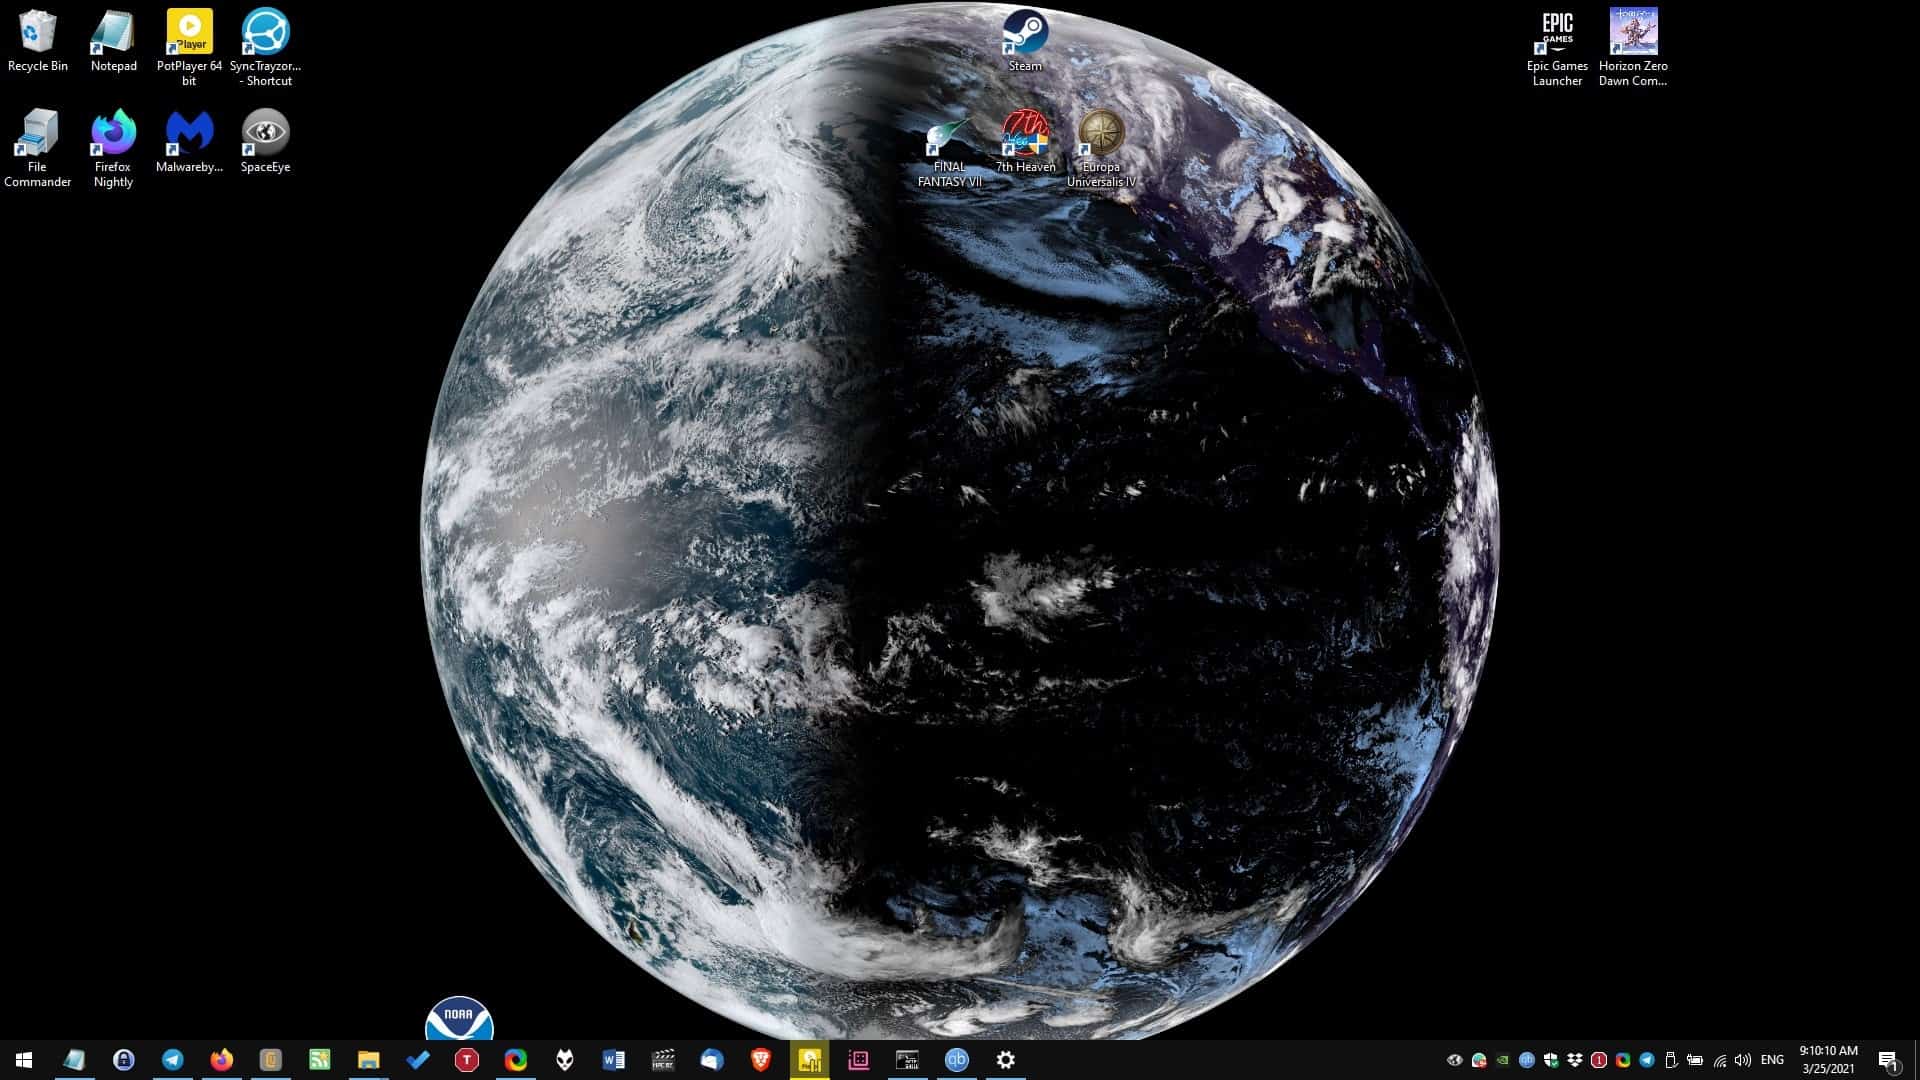 SpaceEye fetches satellite images of the Earth and sets it as your desktop wallpaper